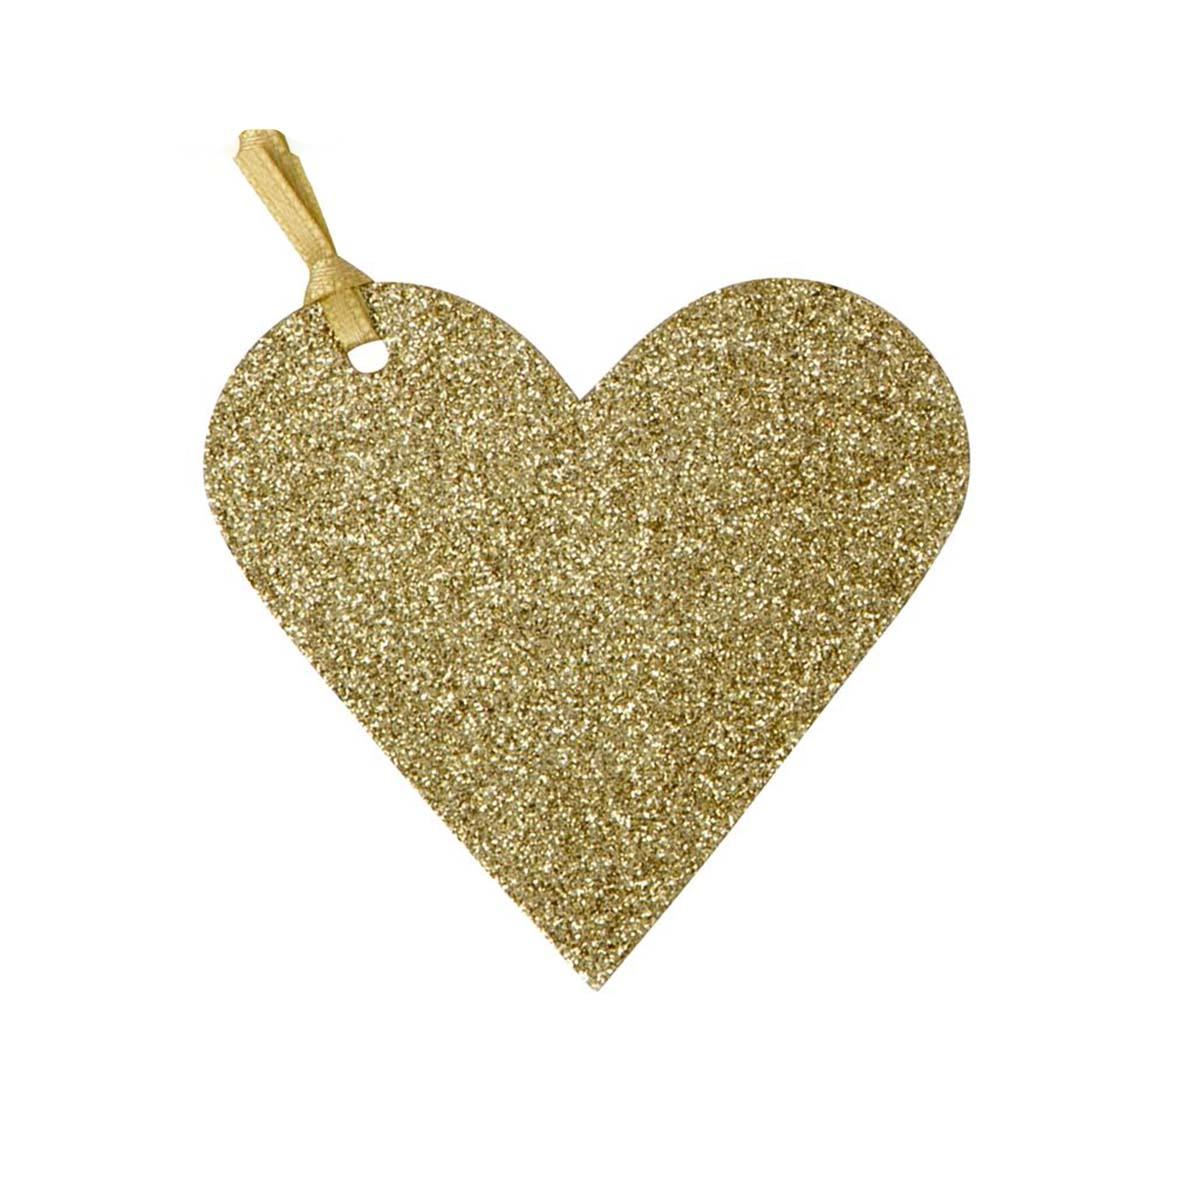 Single Heart Shaped Gold Gift Tag Displayed In Full